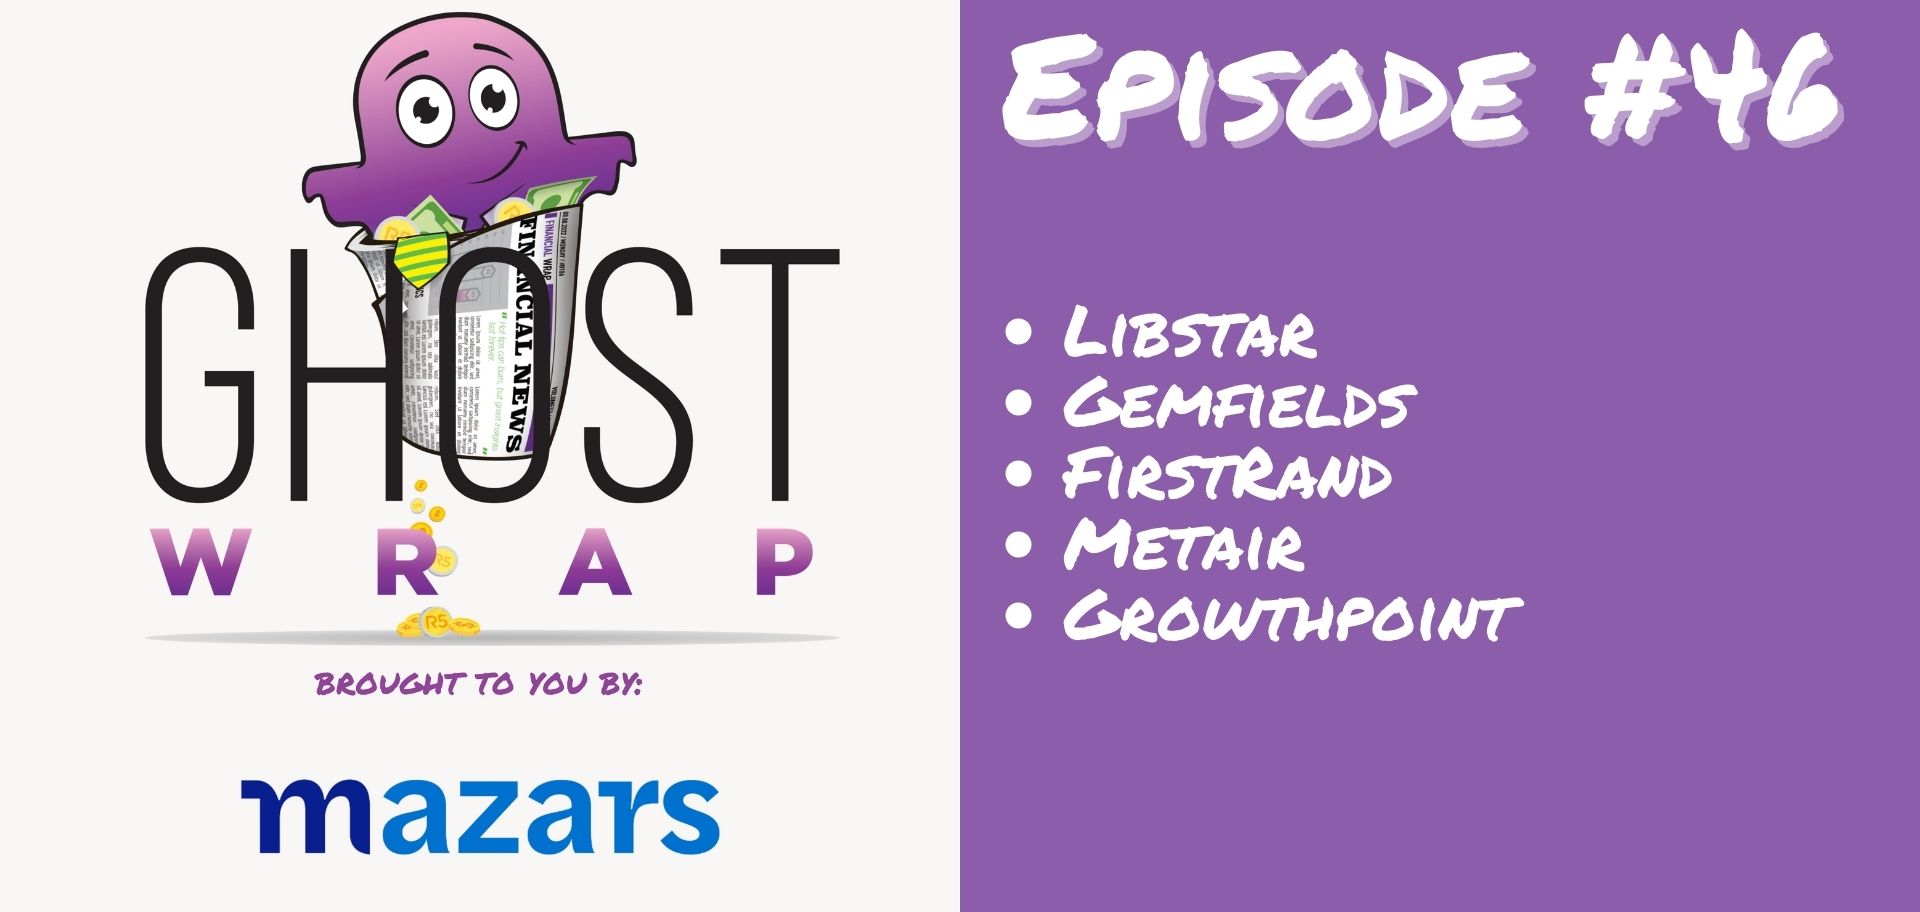 Ghost Wrap #46 (Libstar | Gemfields | FirstRand | Metair | Growthpoint)